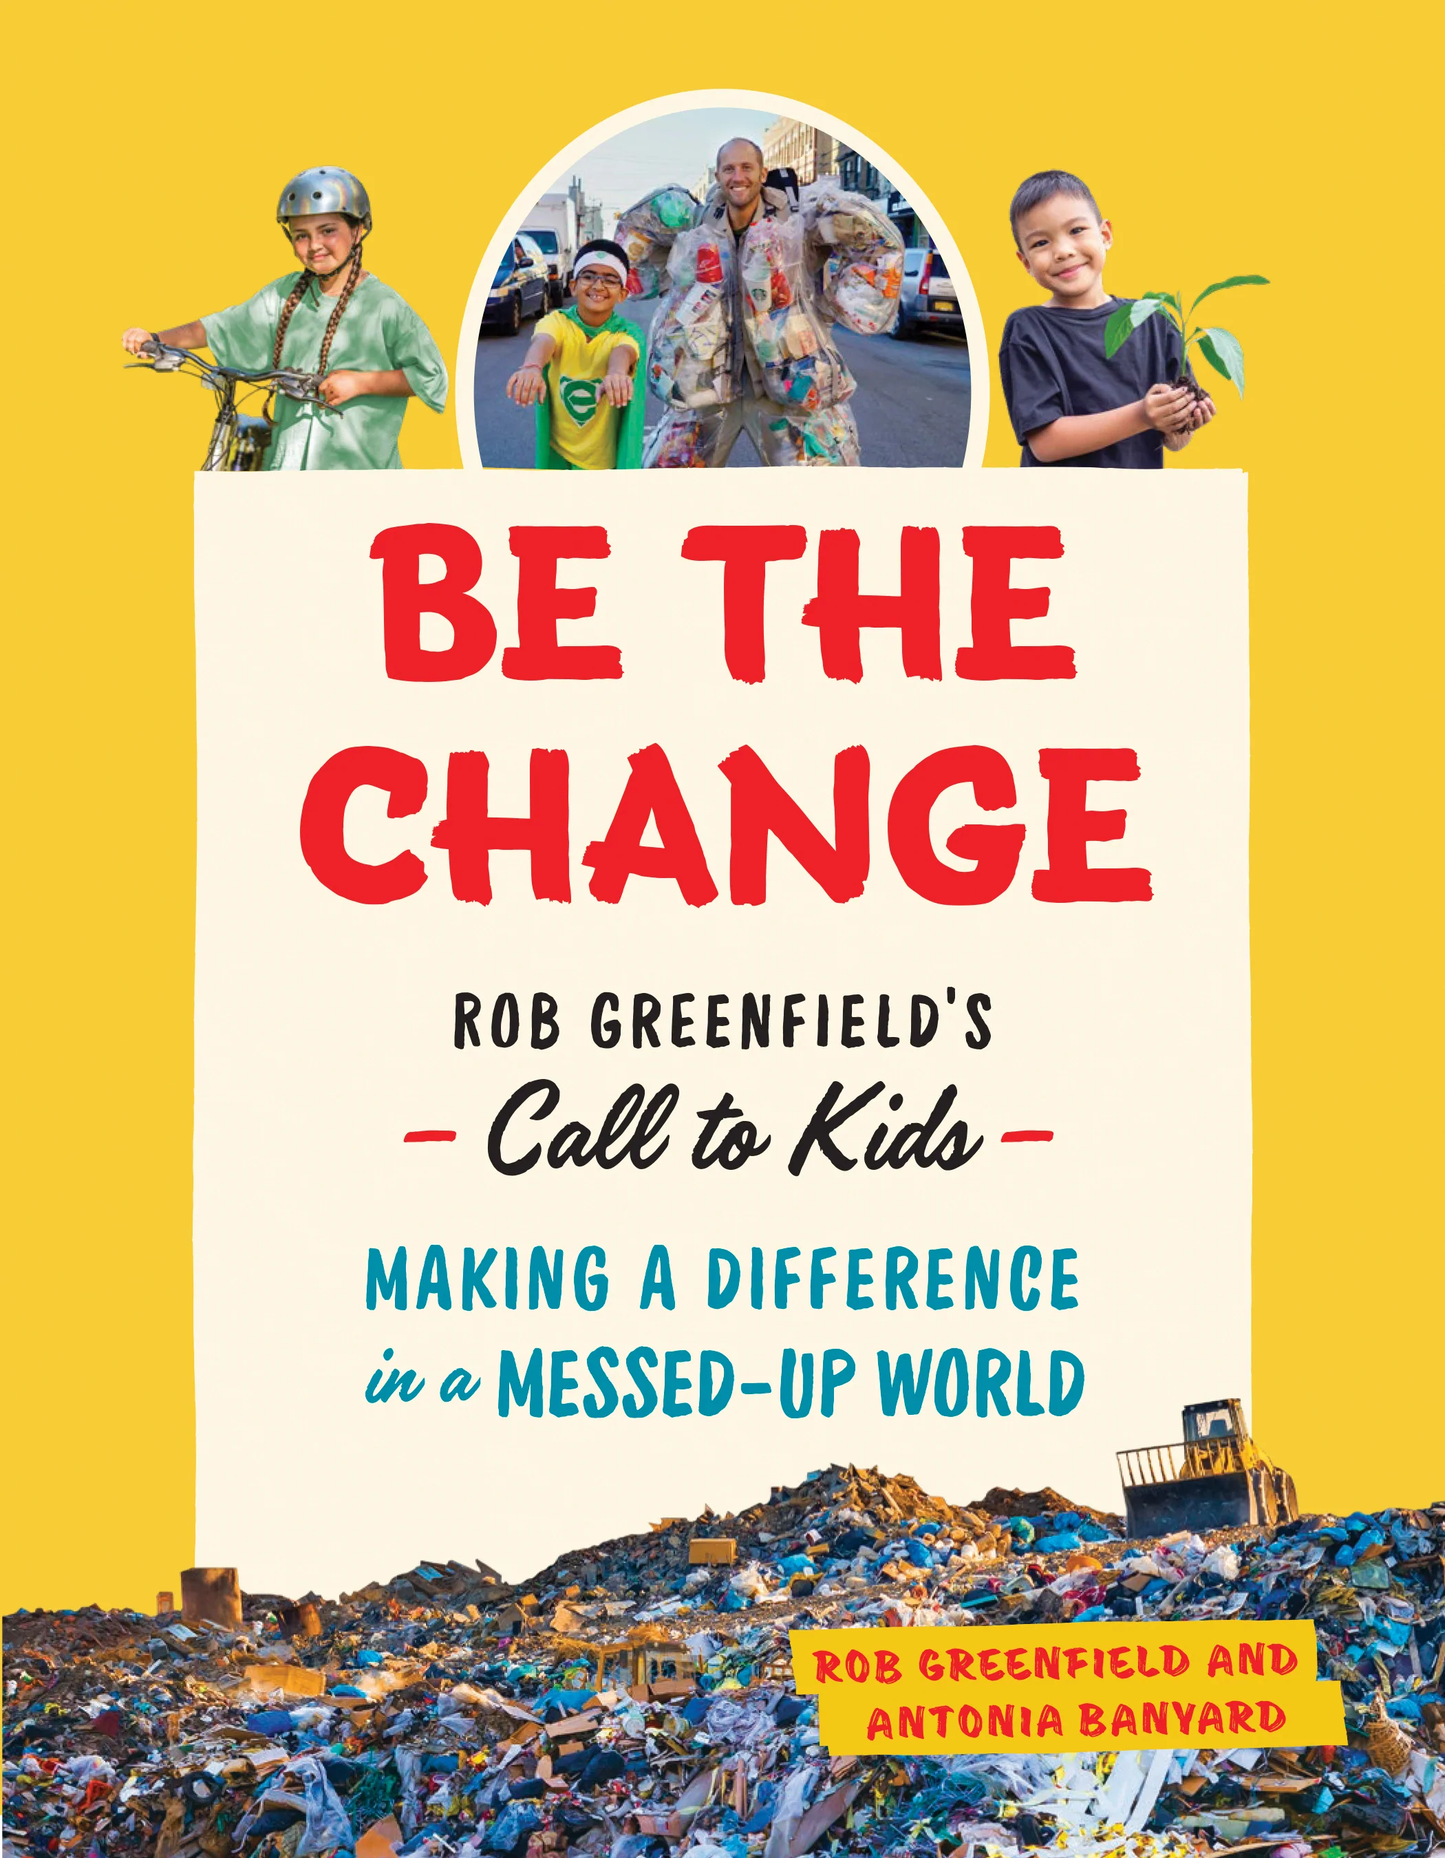 Be The Change: A Call to Kids, Making A Difference in a Messed-Up World by Rob Greenfield